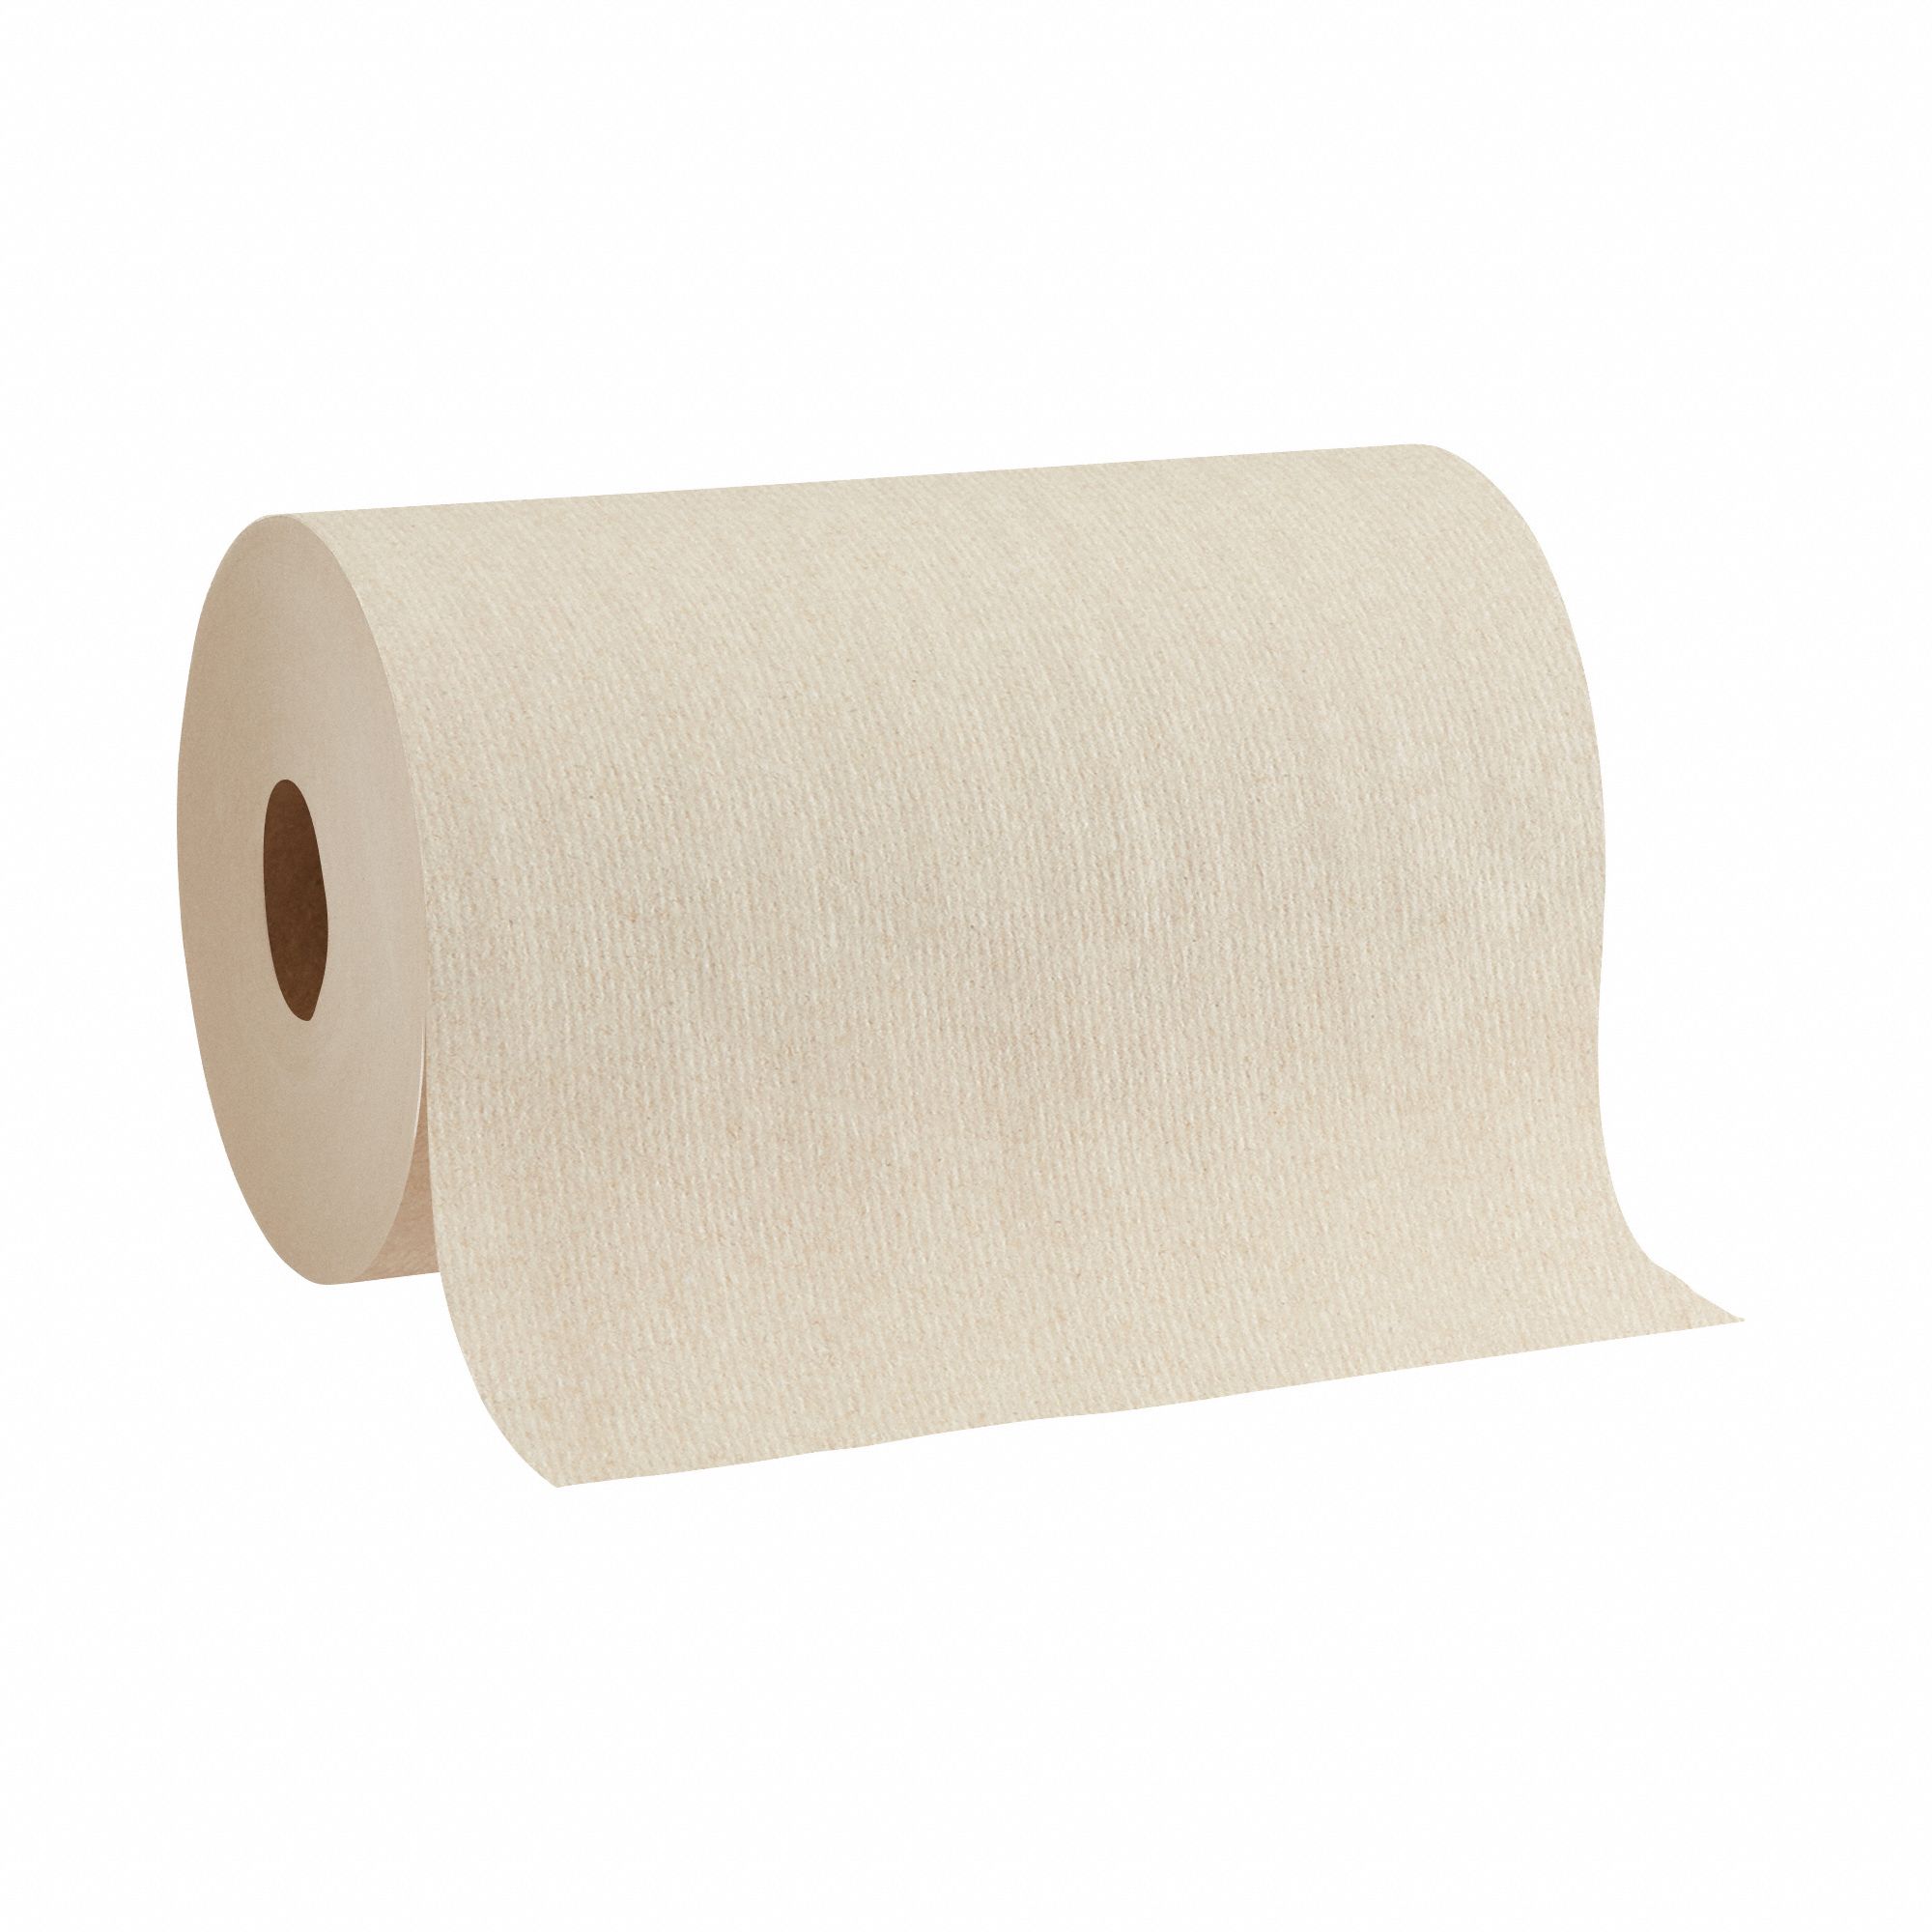 Paper Towel Roll: Brown, 9 in Roll Wd, 500 ft Roll Lg, Continuous Sheet Lg, 6 PK